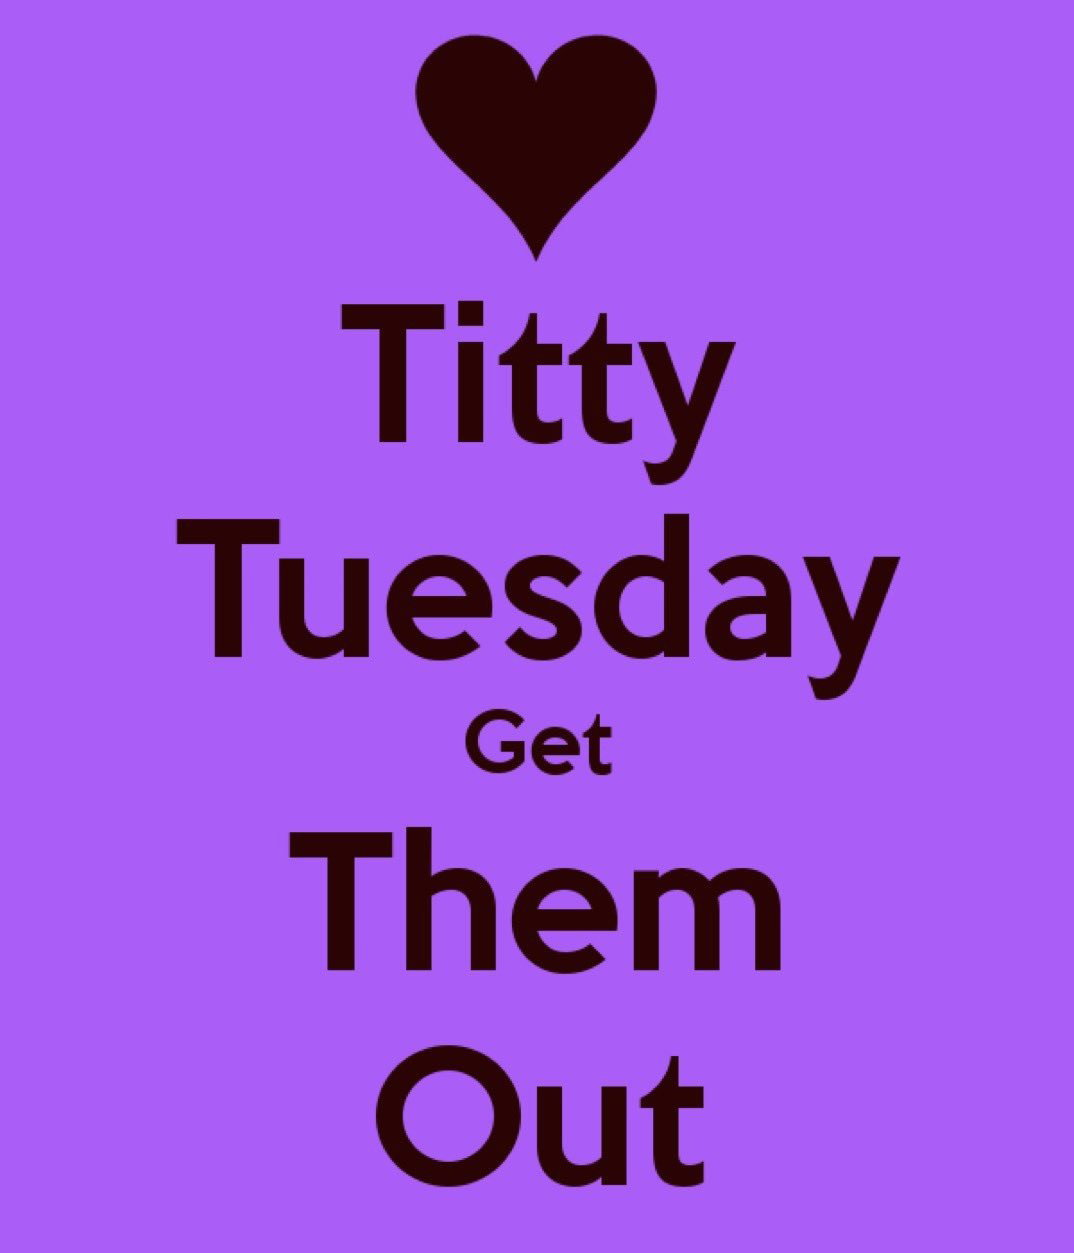 Photo by Juicylucy38xxx with the username @Juicylucy38xxx, who is a verified user,  December 12, 2023 at 11:14 AM. The post is about the topic JuicyLucy38xxx and the text says 'So its Titty Tuesday again, plus its nearing Christmas and so many of you naughty boys and girls have wanked over my pics this past year, so I'm expecting lots of kind gifts off my Wishtender and Wishlist (Both links in Bio) and then you'll all have even..'